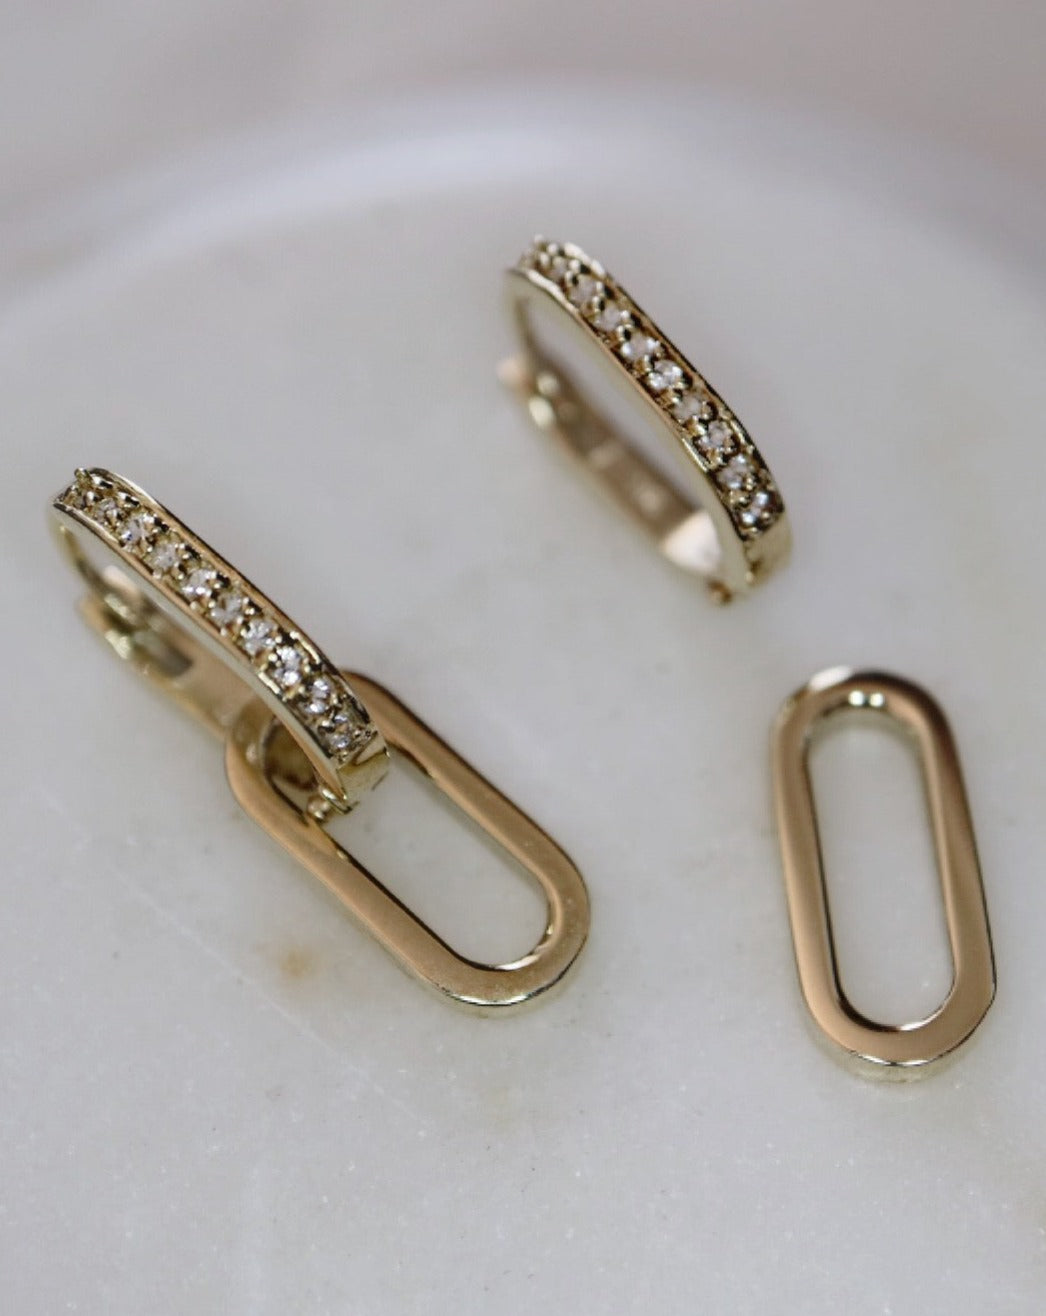 9ct gold and white sapphire earrings